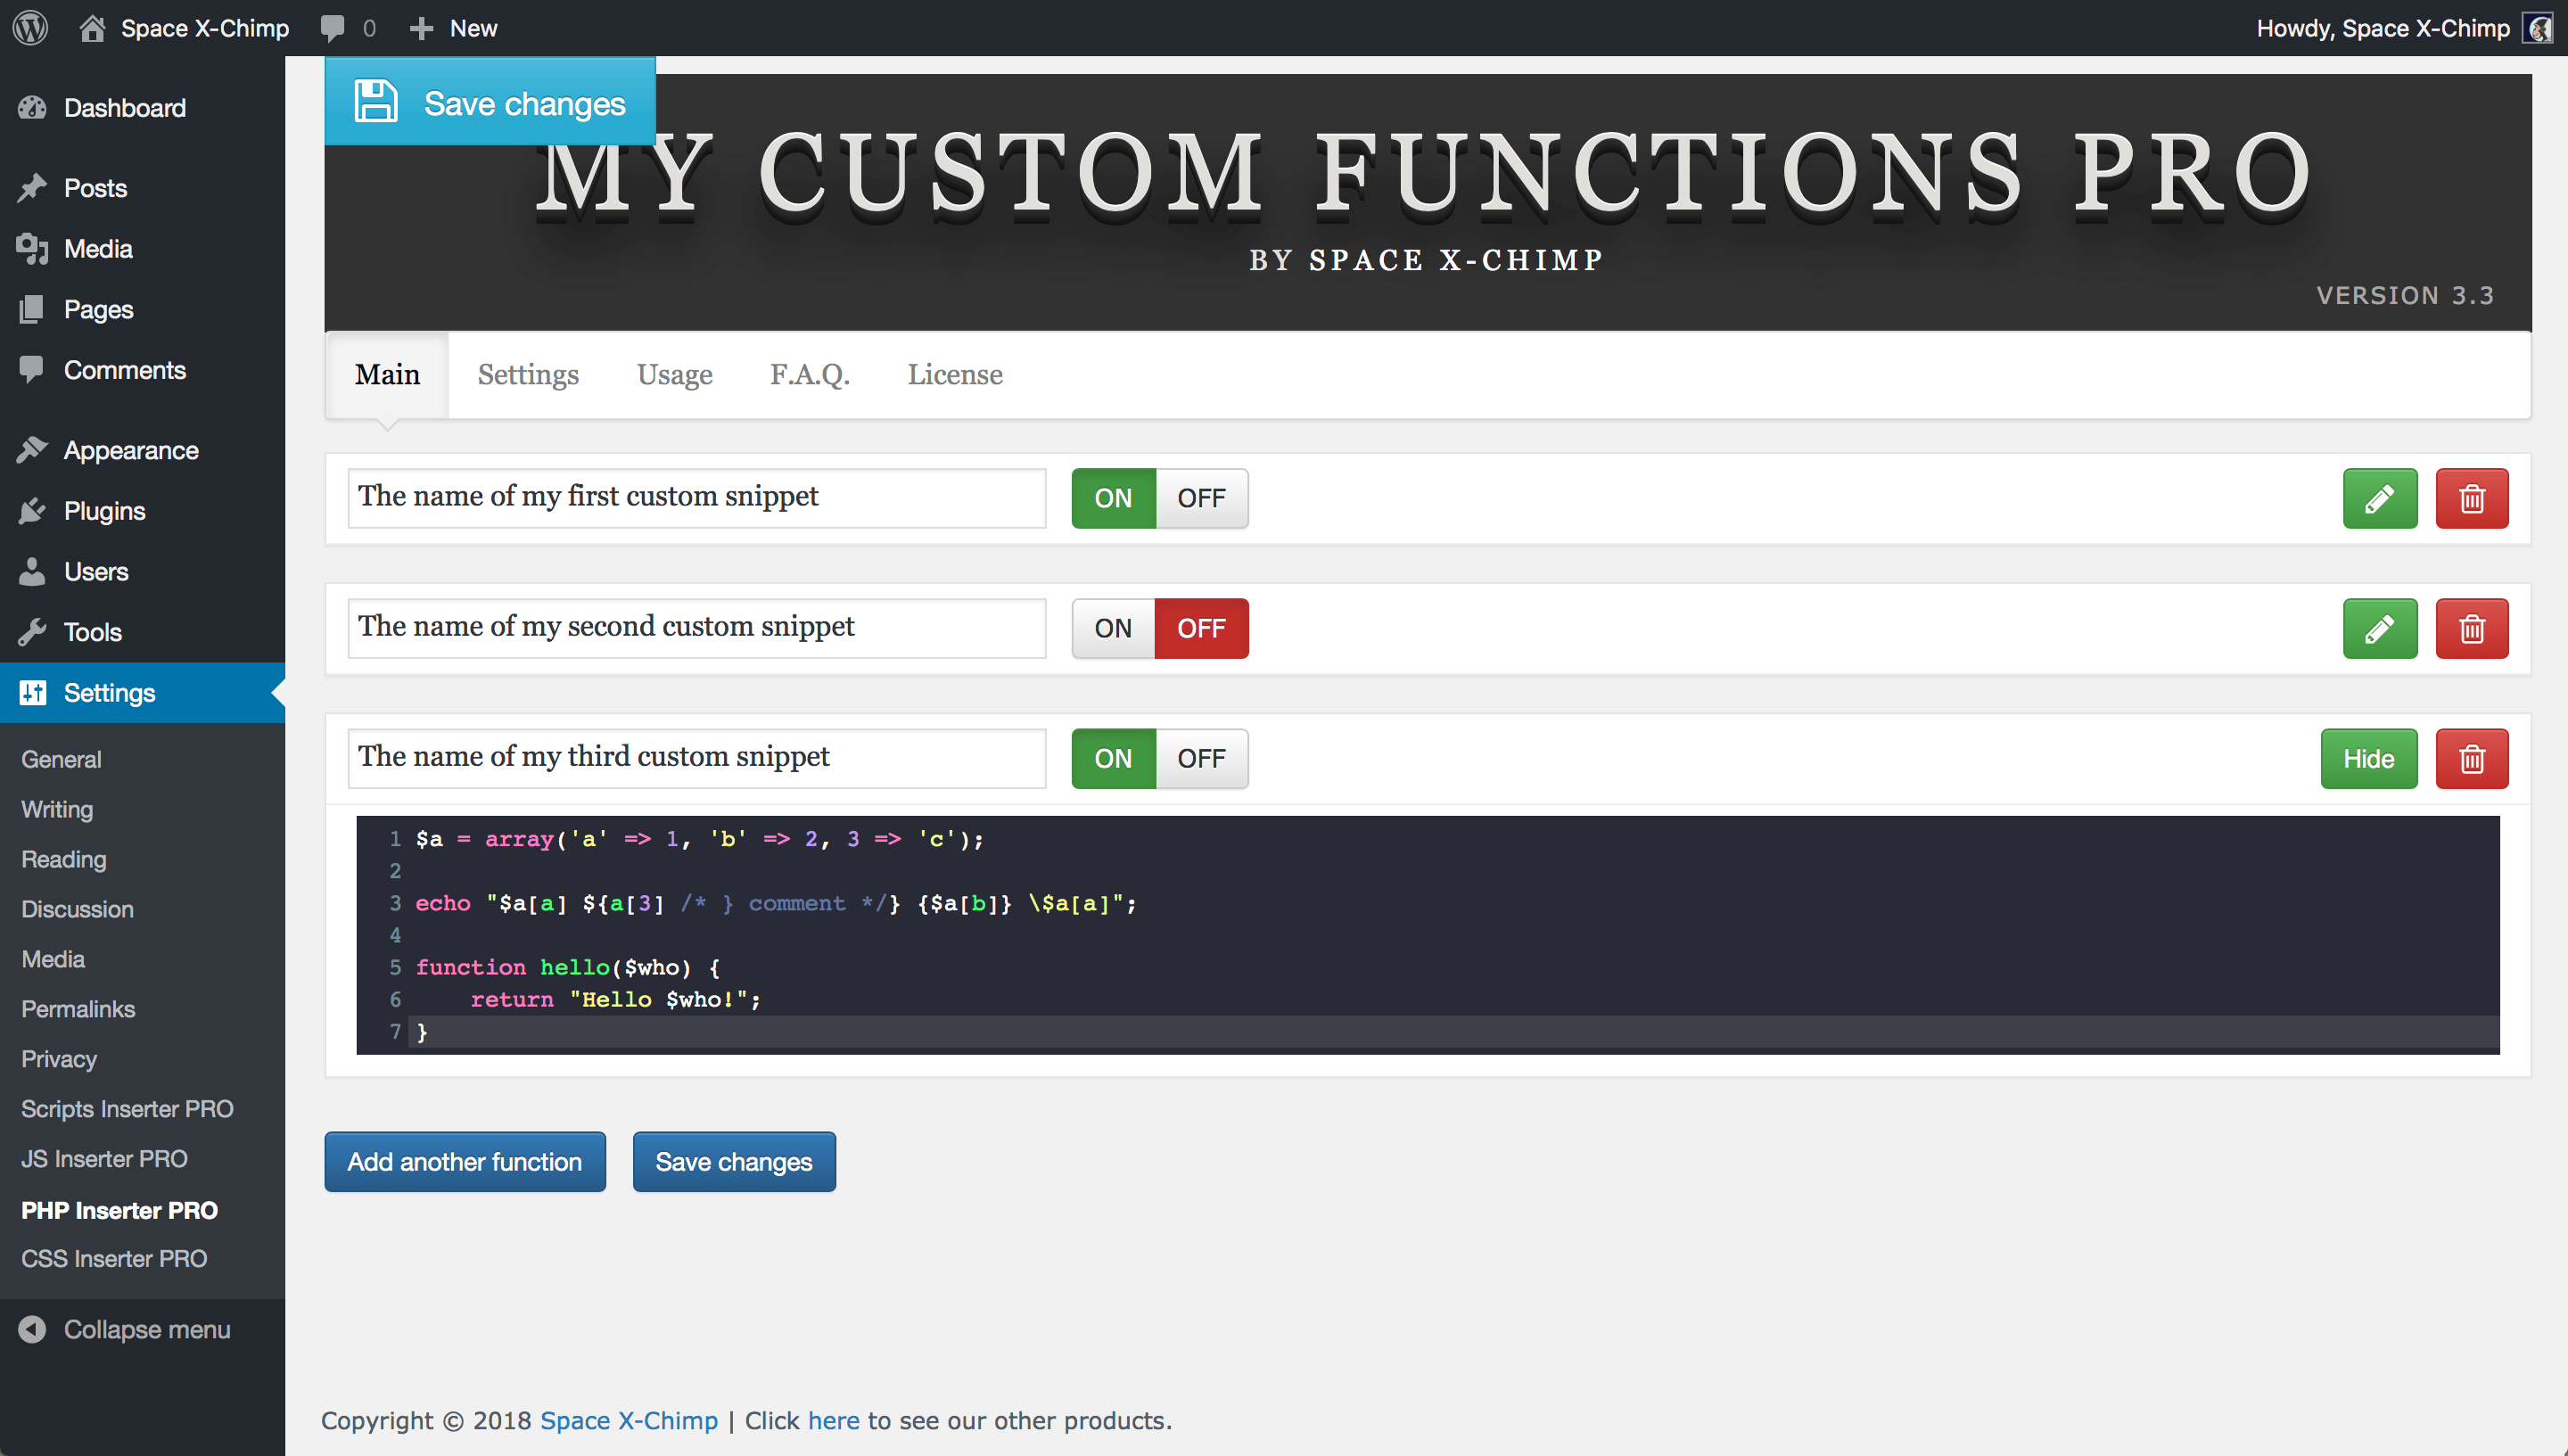 WP plugin "My Custom Functions PRO" by Space X-Chimp